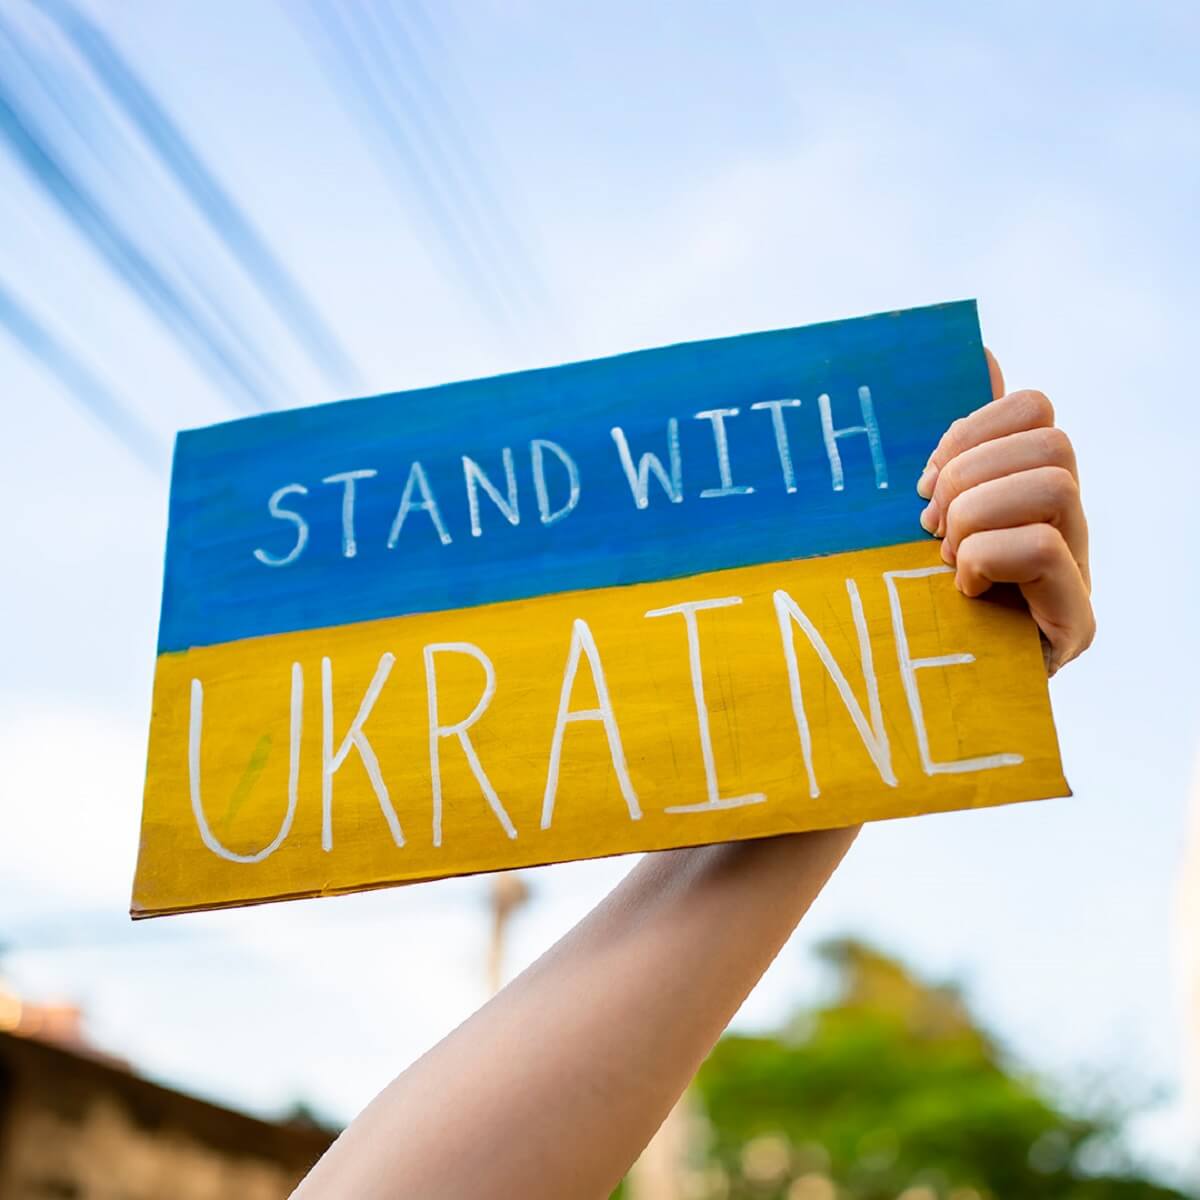 Two Outdoor Companies Step Up to Help Ukraine